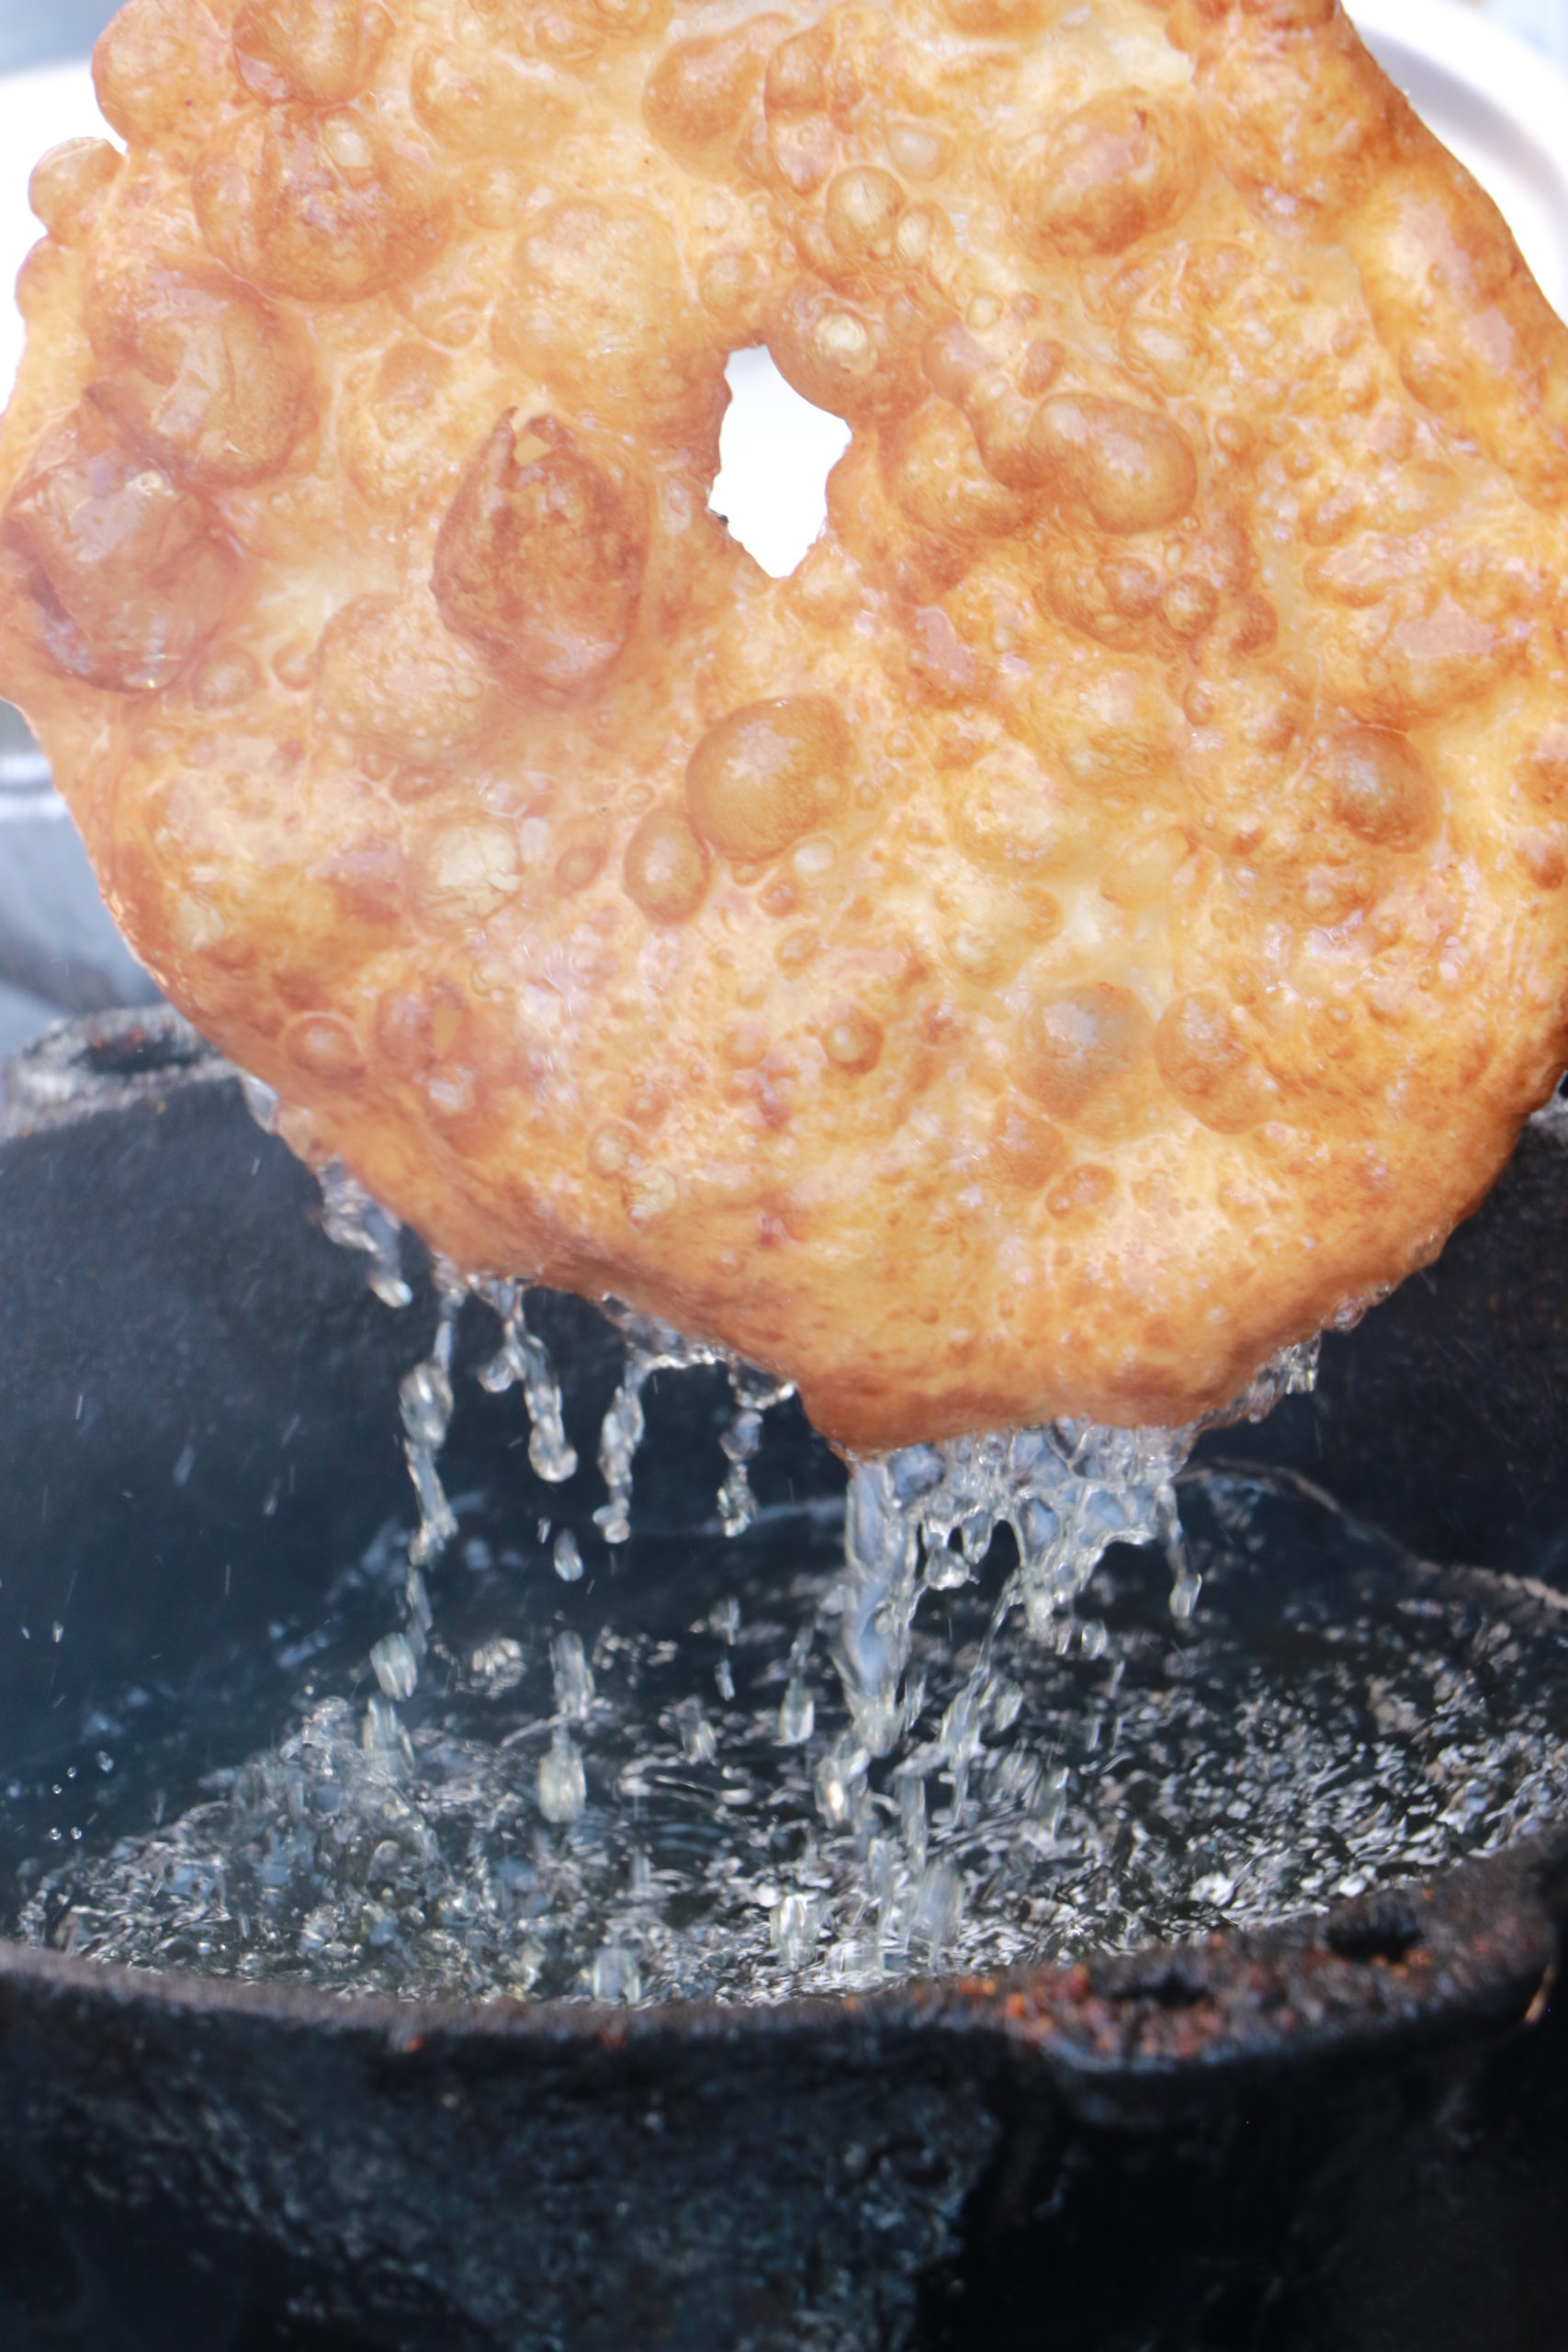 fry bread being made